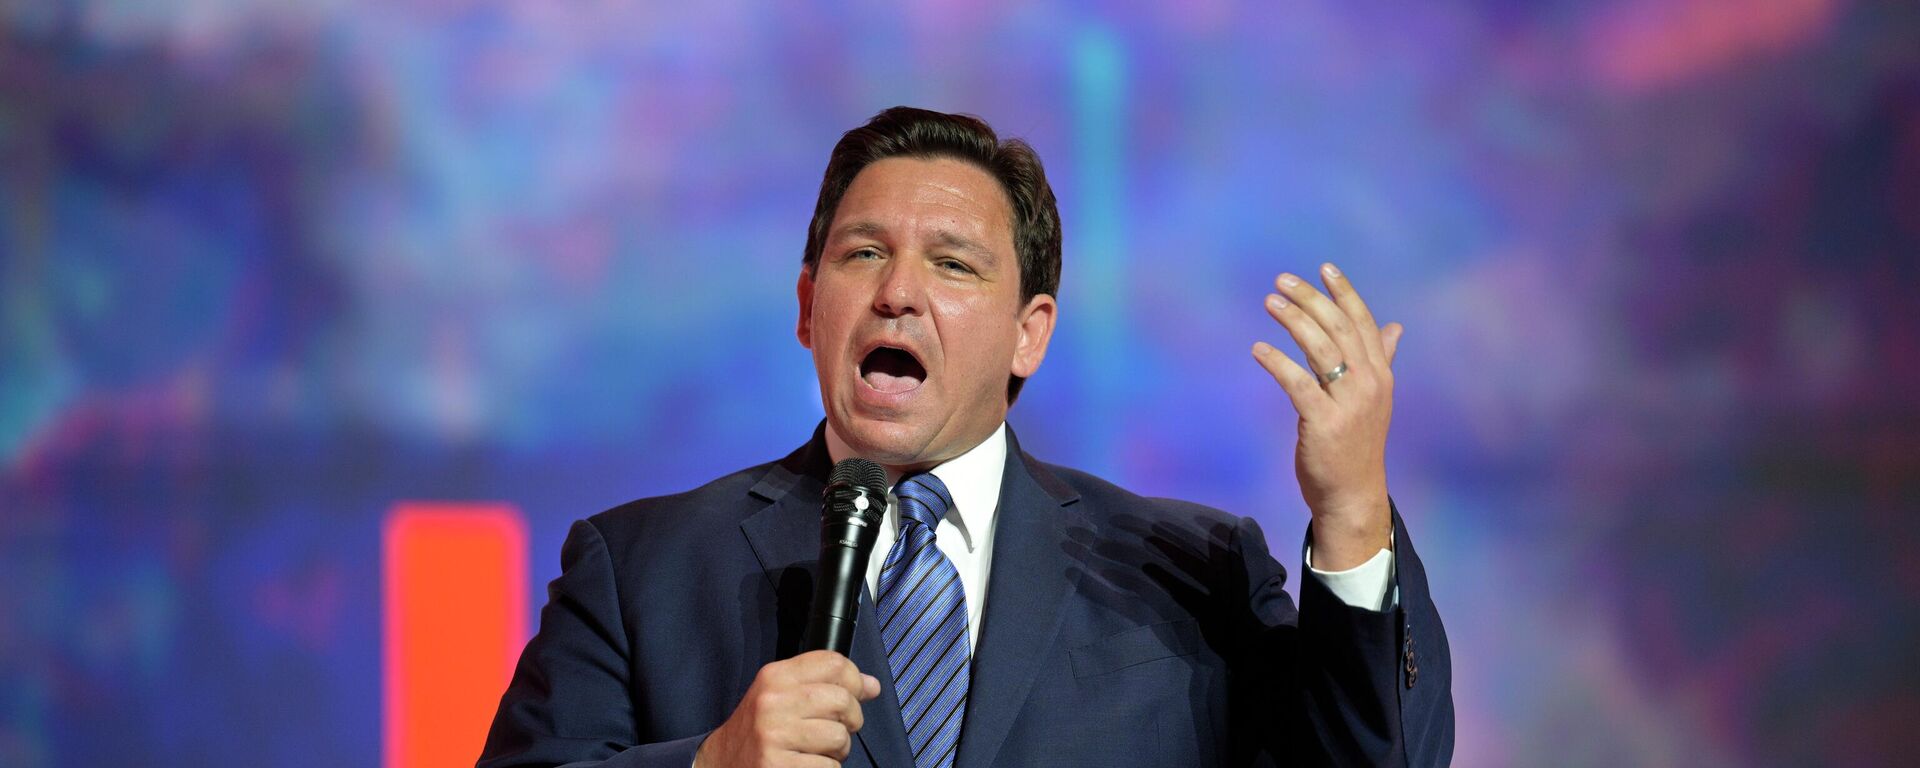 FILE - Florida Gov. Ron DeSantis addresses attendees during the Turning Point USA Student Action Summit, Friday, July 22, 2022, in Tampa, Fla. - Sputnik International, 1920, 16.03.2023